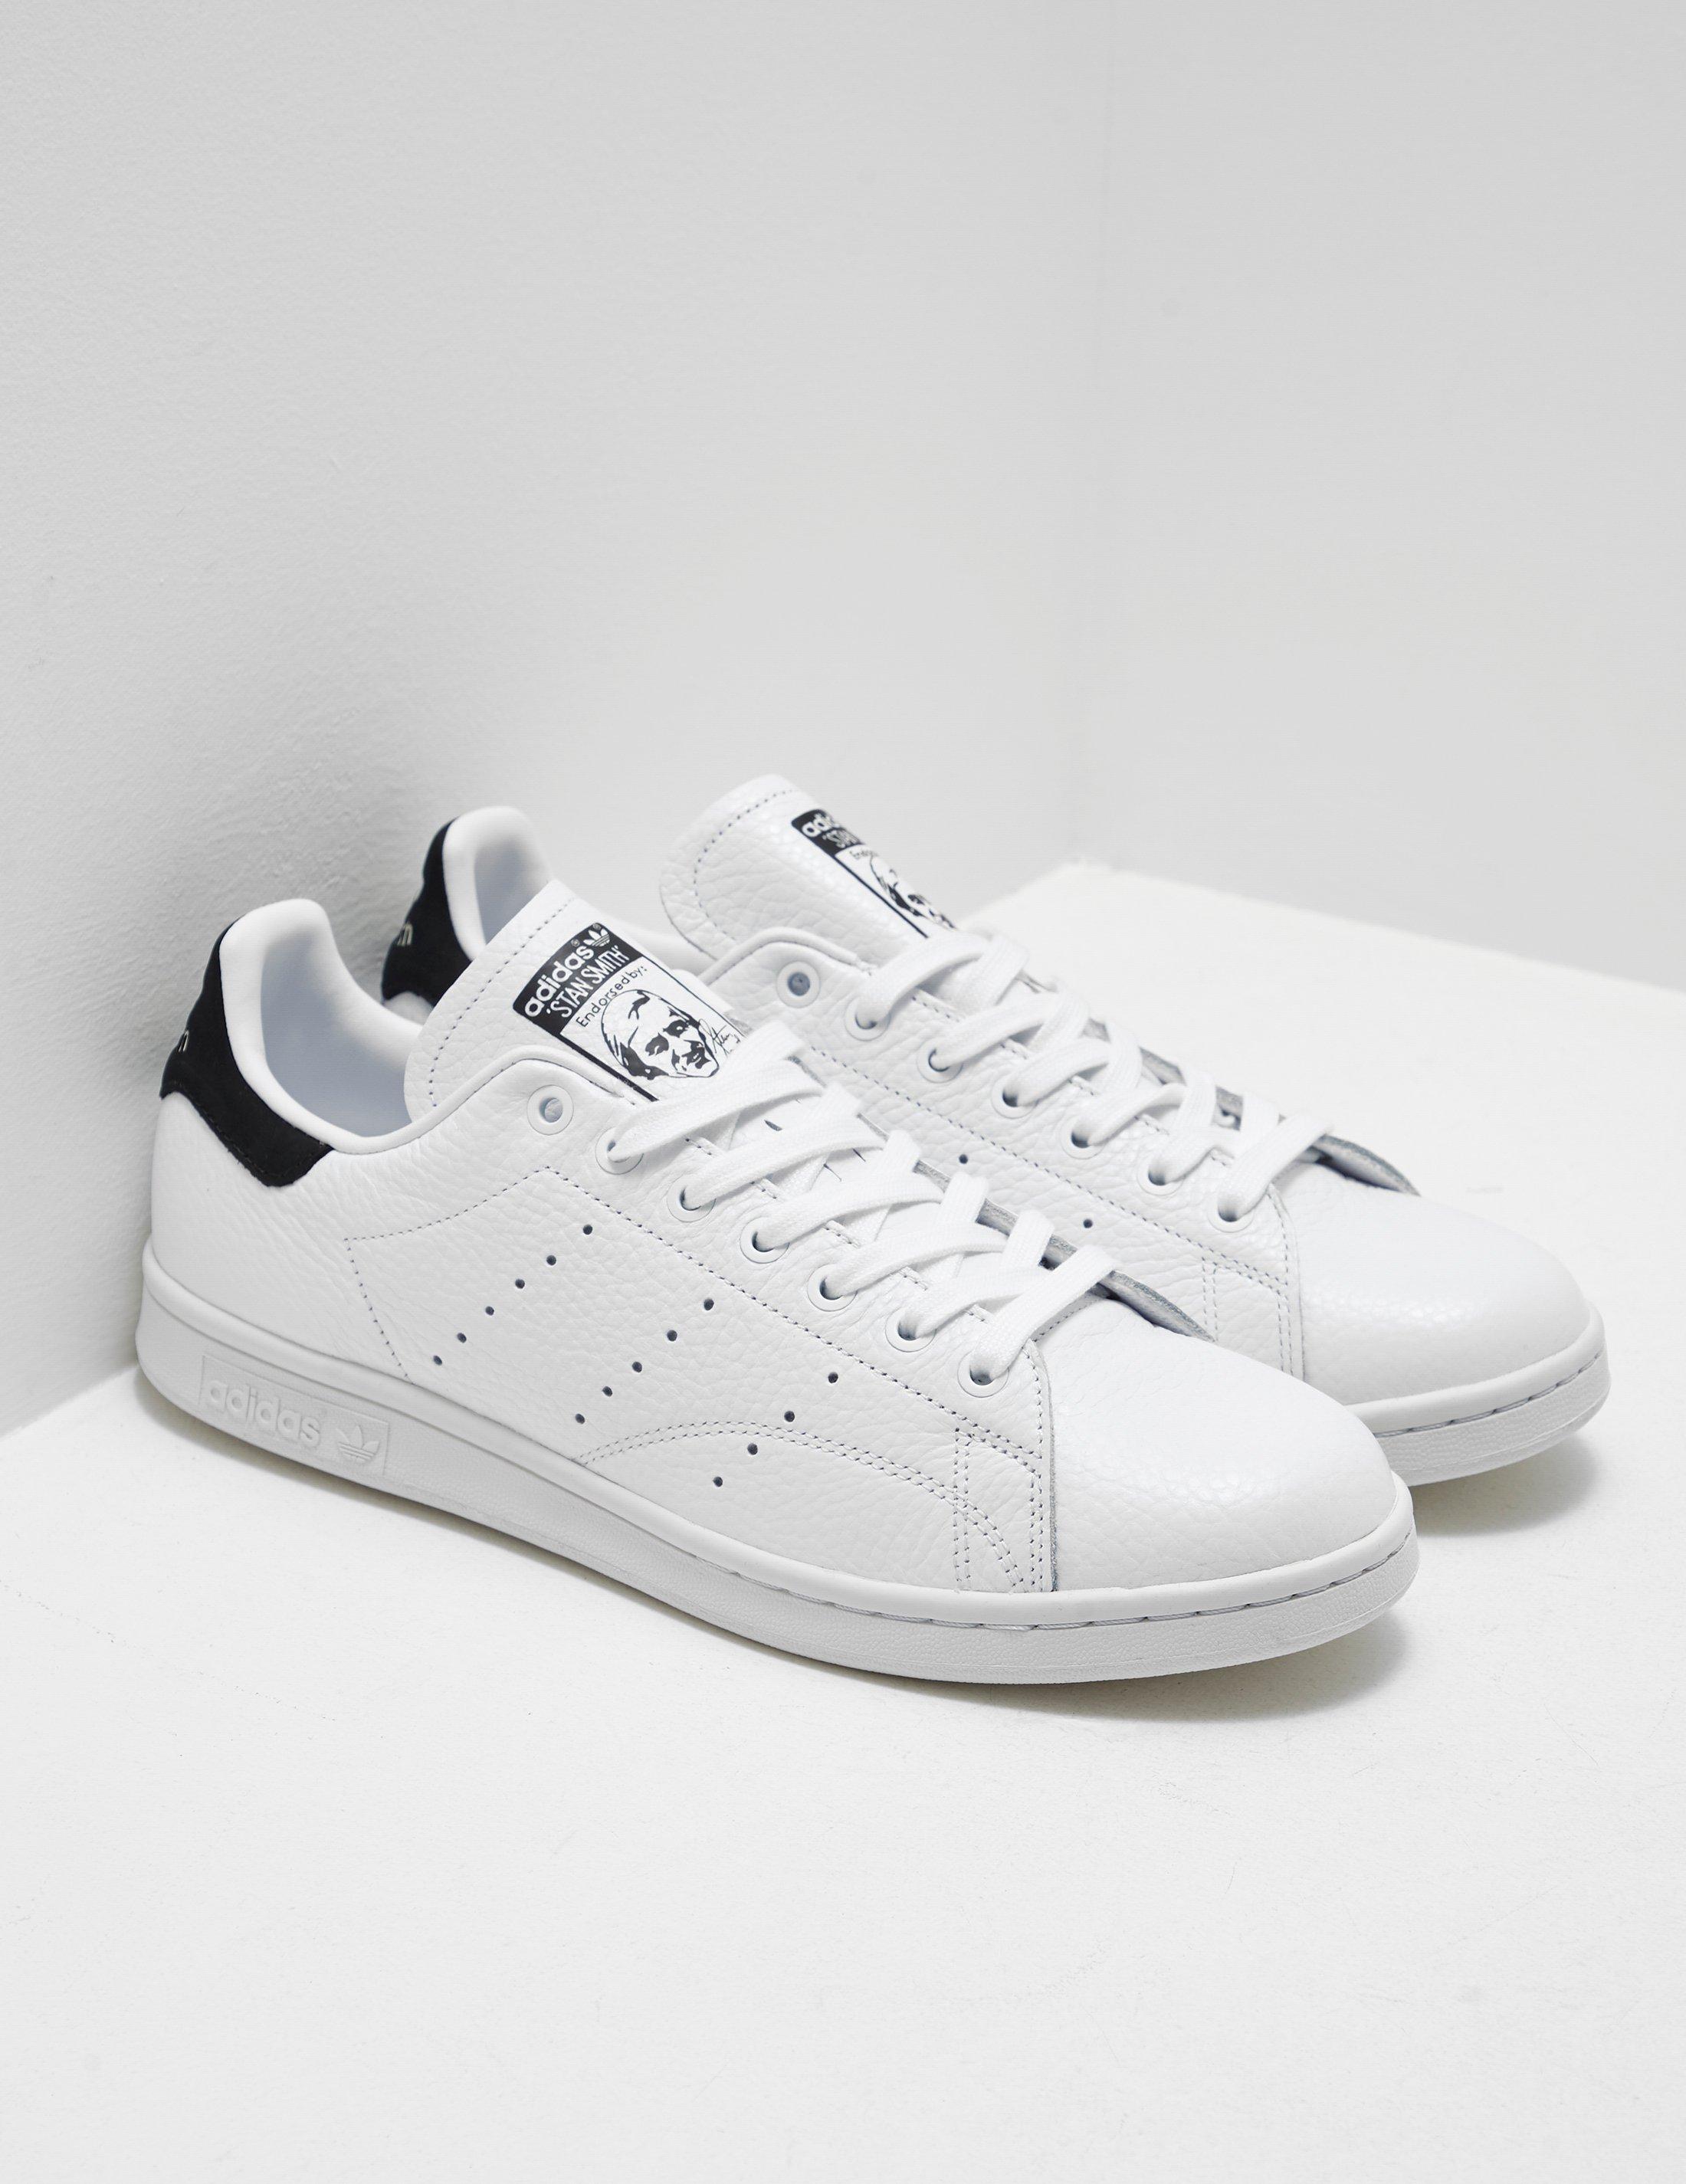 adidas Originals Leather Stan Smith Shoes in White for Men - Lyst